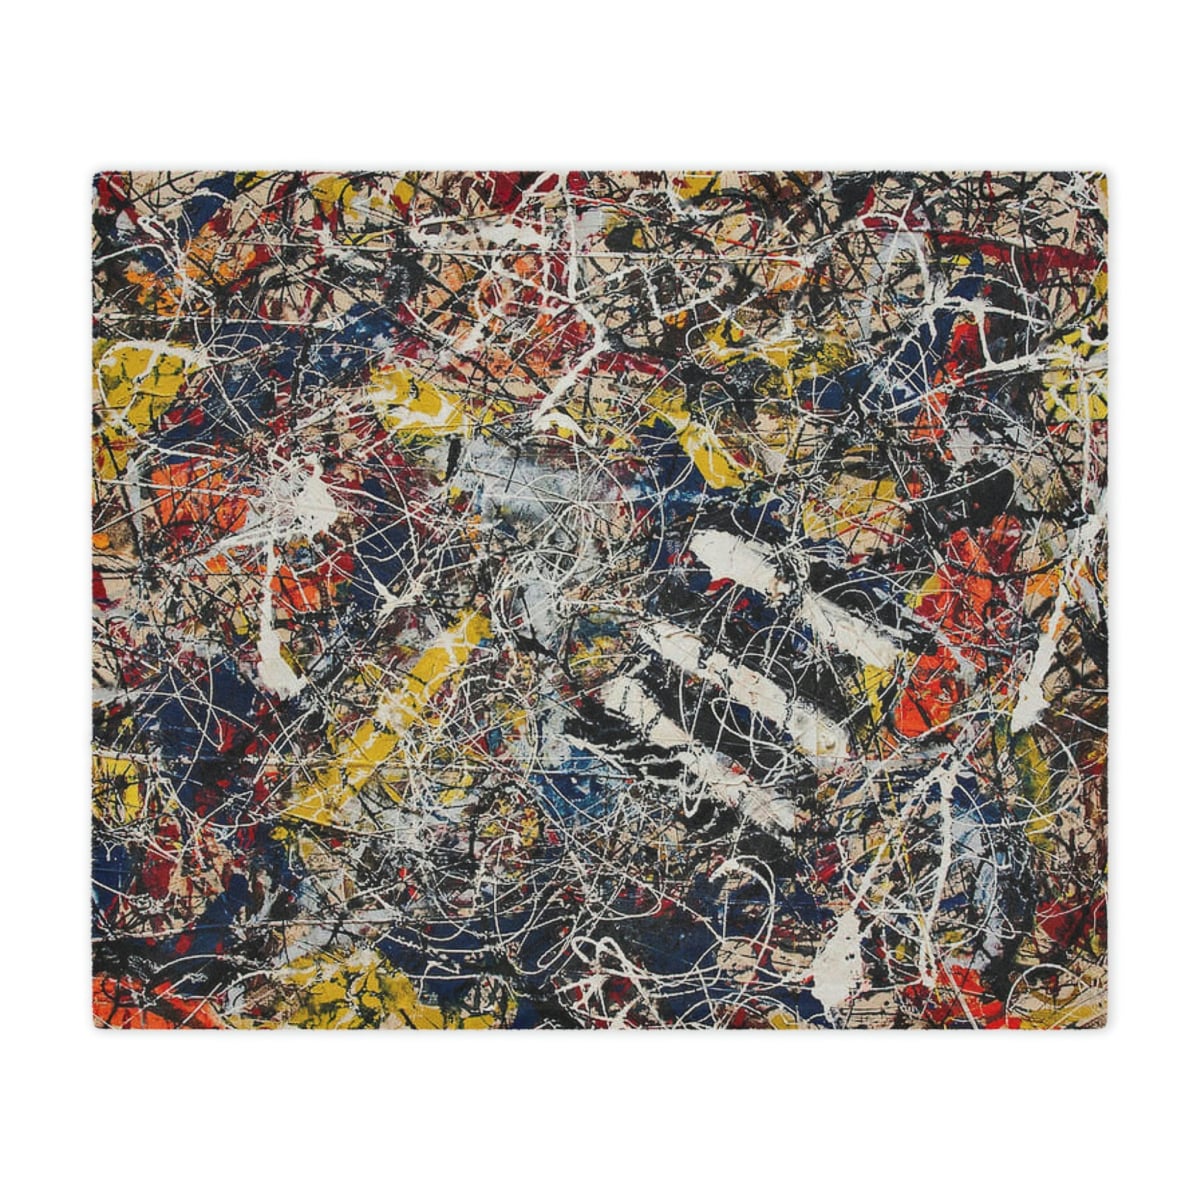 Enhance Your Decor with Number 17A Jackson Pollock Blanket